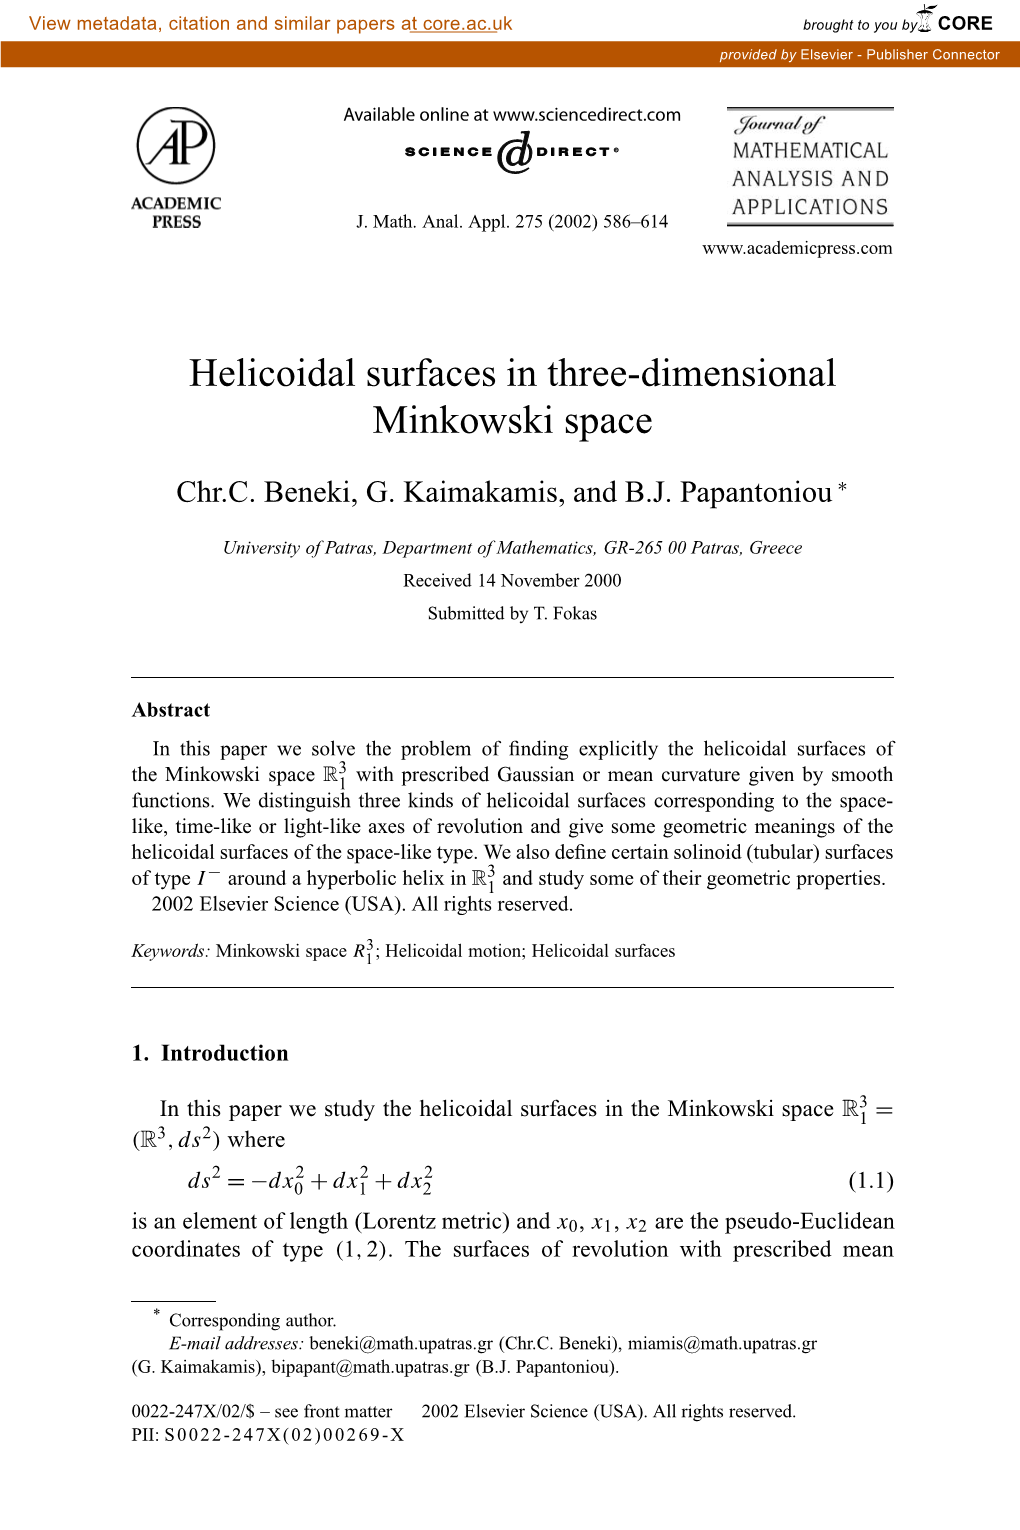 Helicoidal Surfaces in Three-Dimensional Minkowski Space